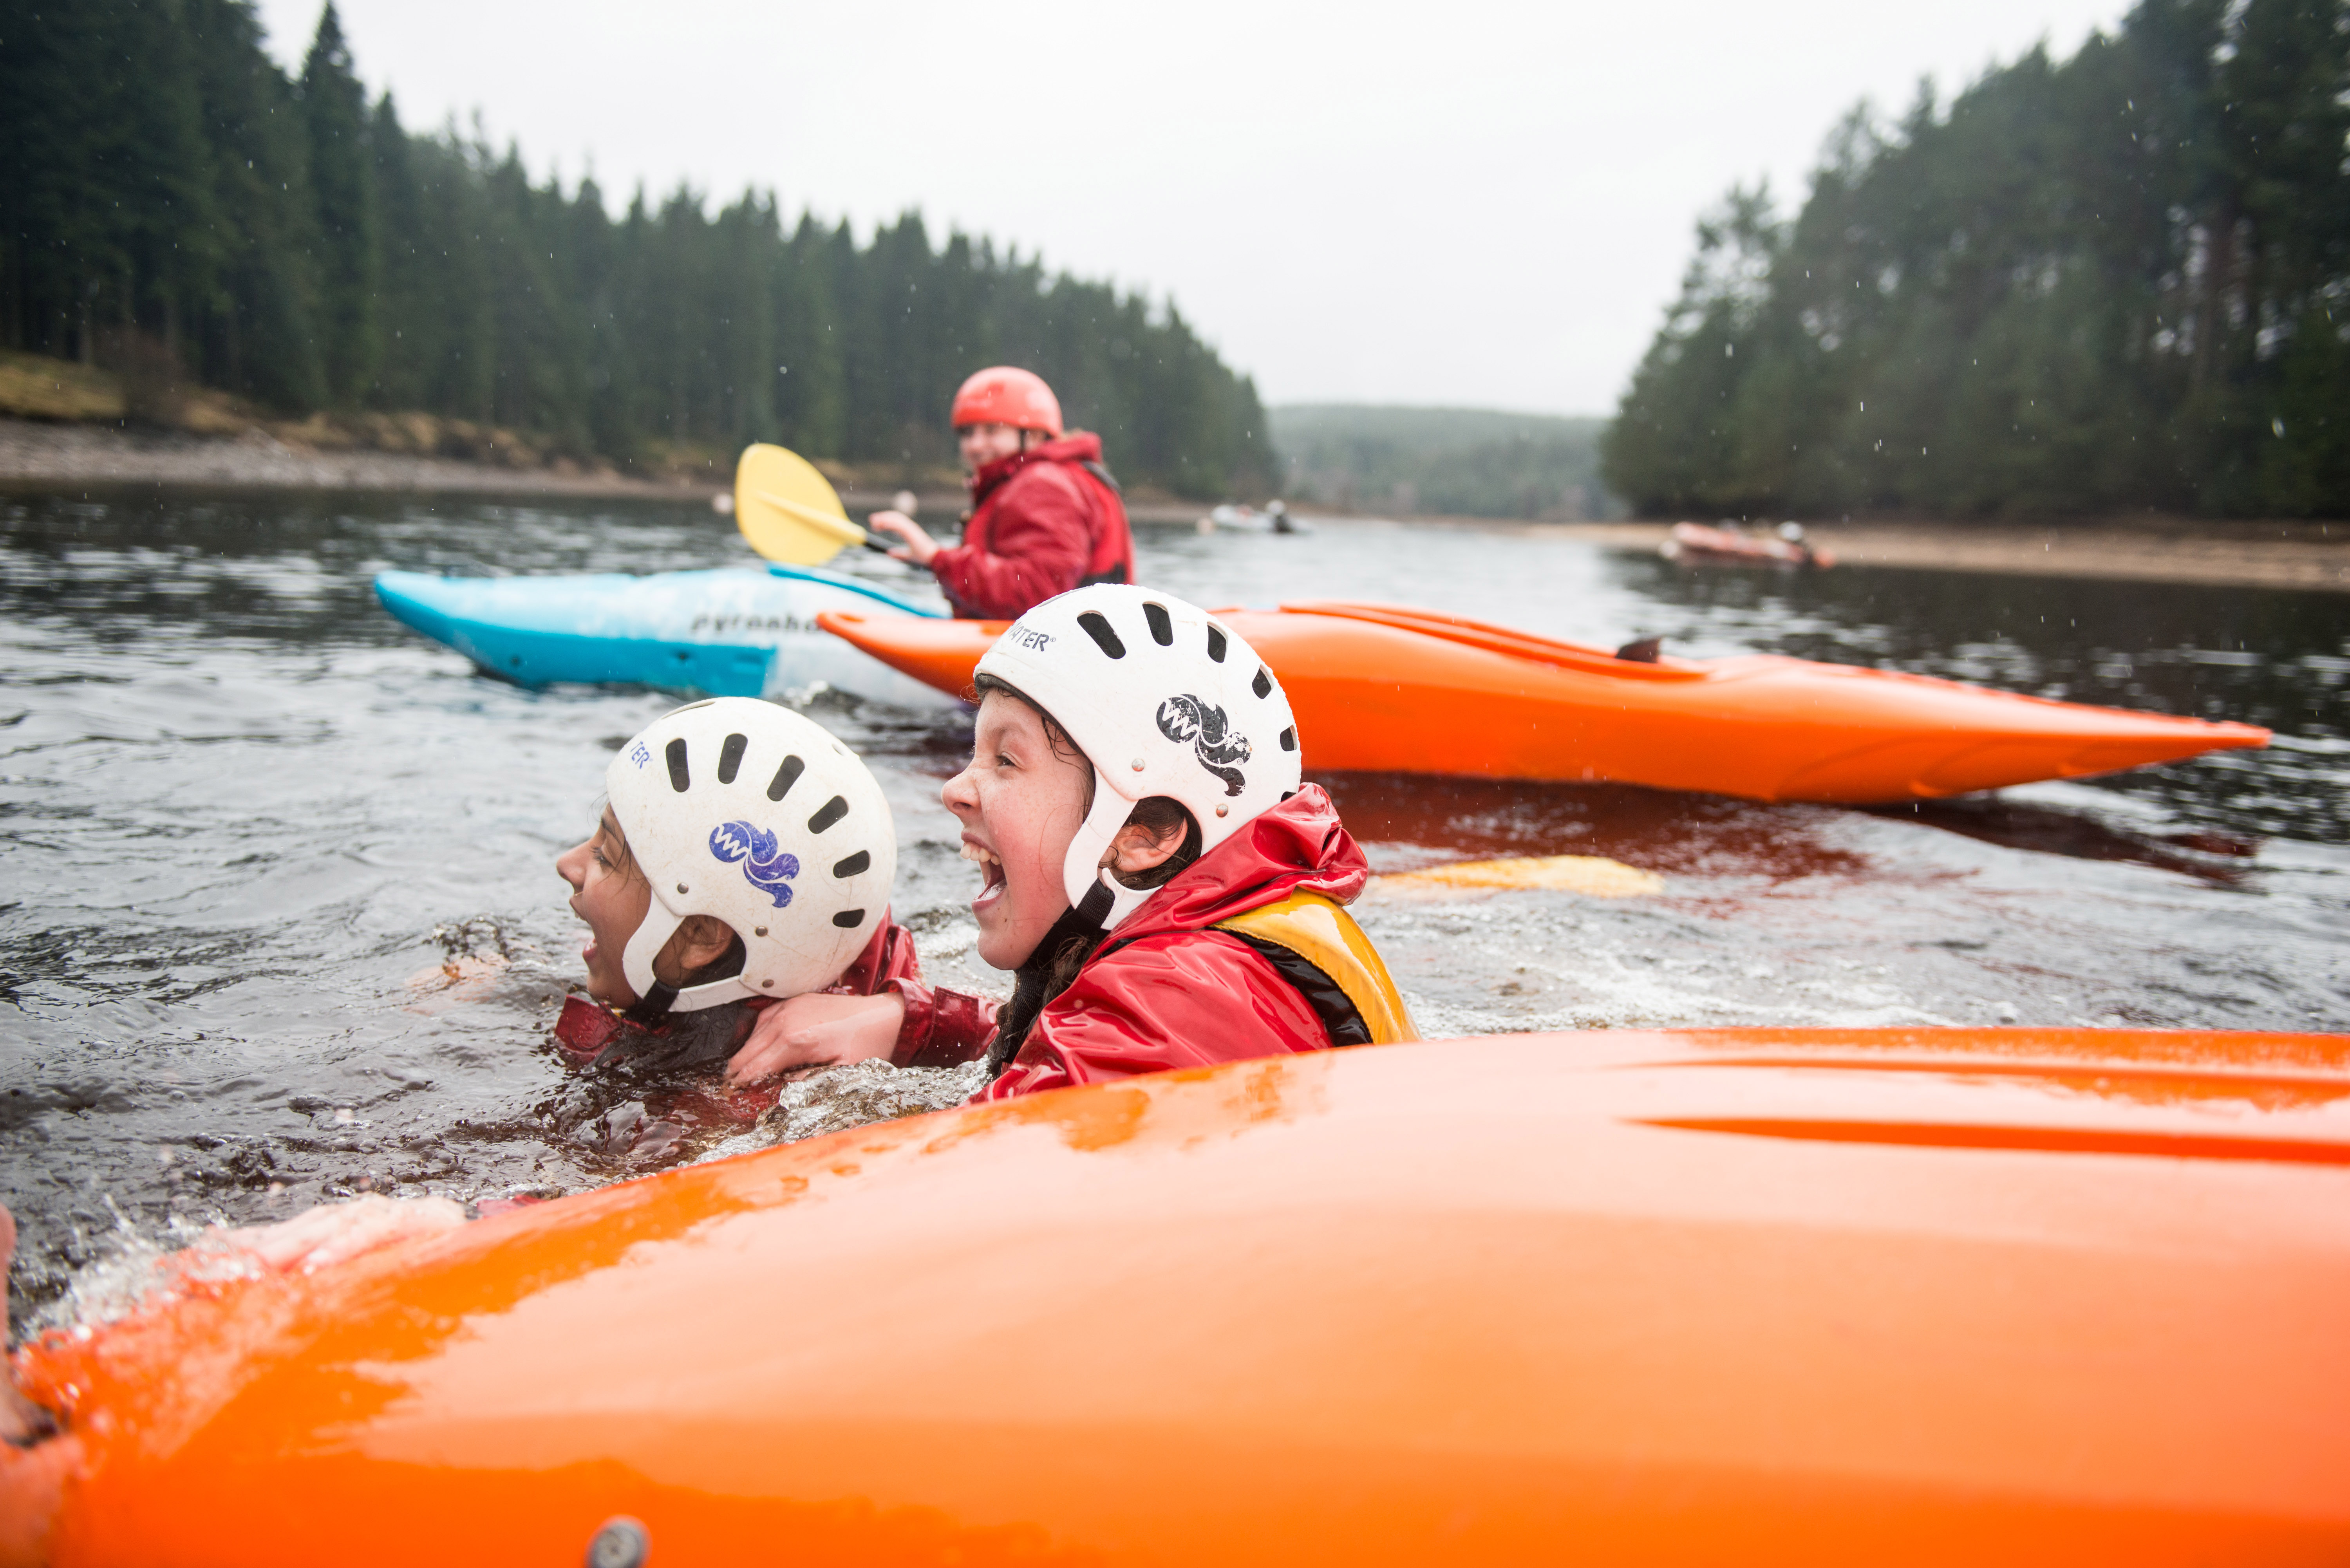 Inspiring adventures for youth groups in the great outdoors.